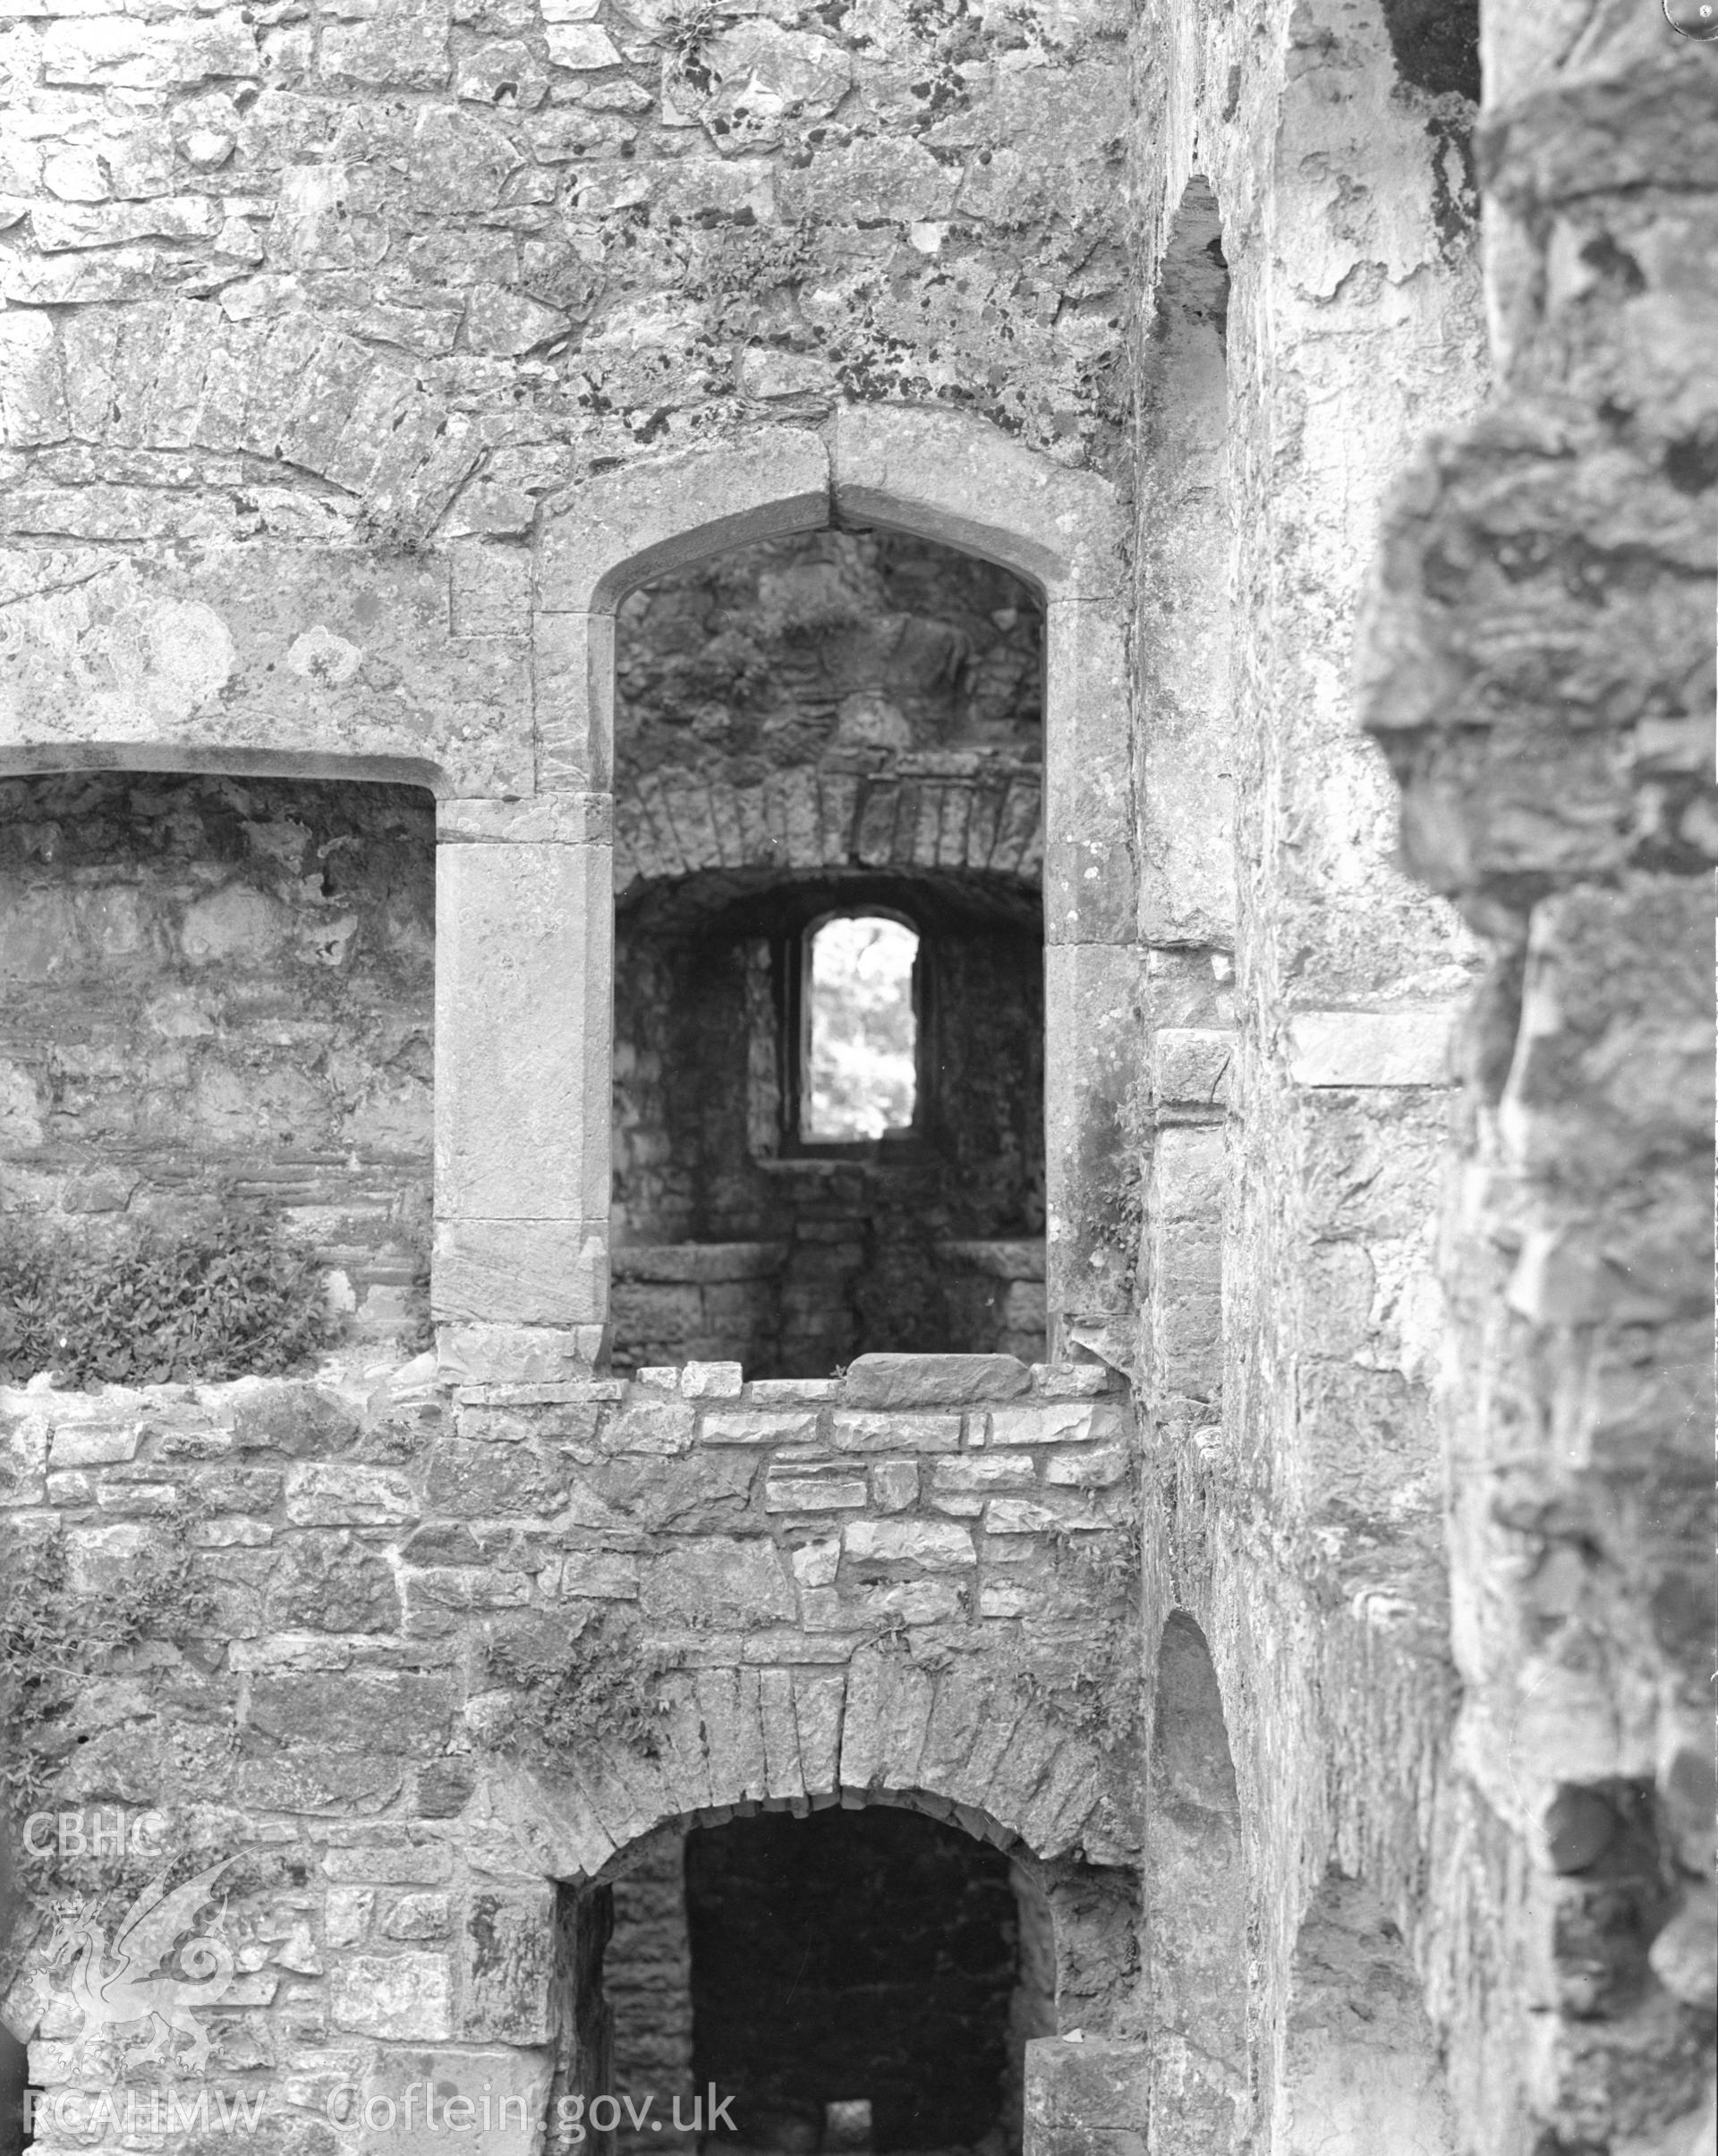 Black and white acetate negative showing detail at Oxwich Castle.